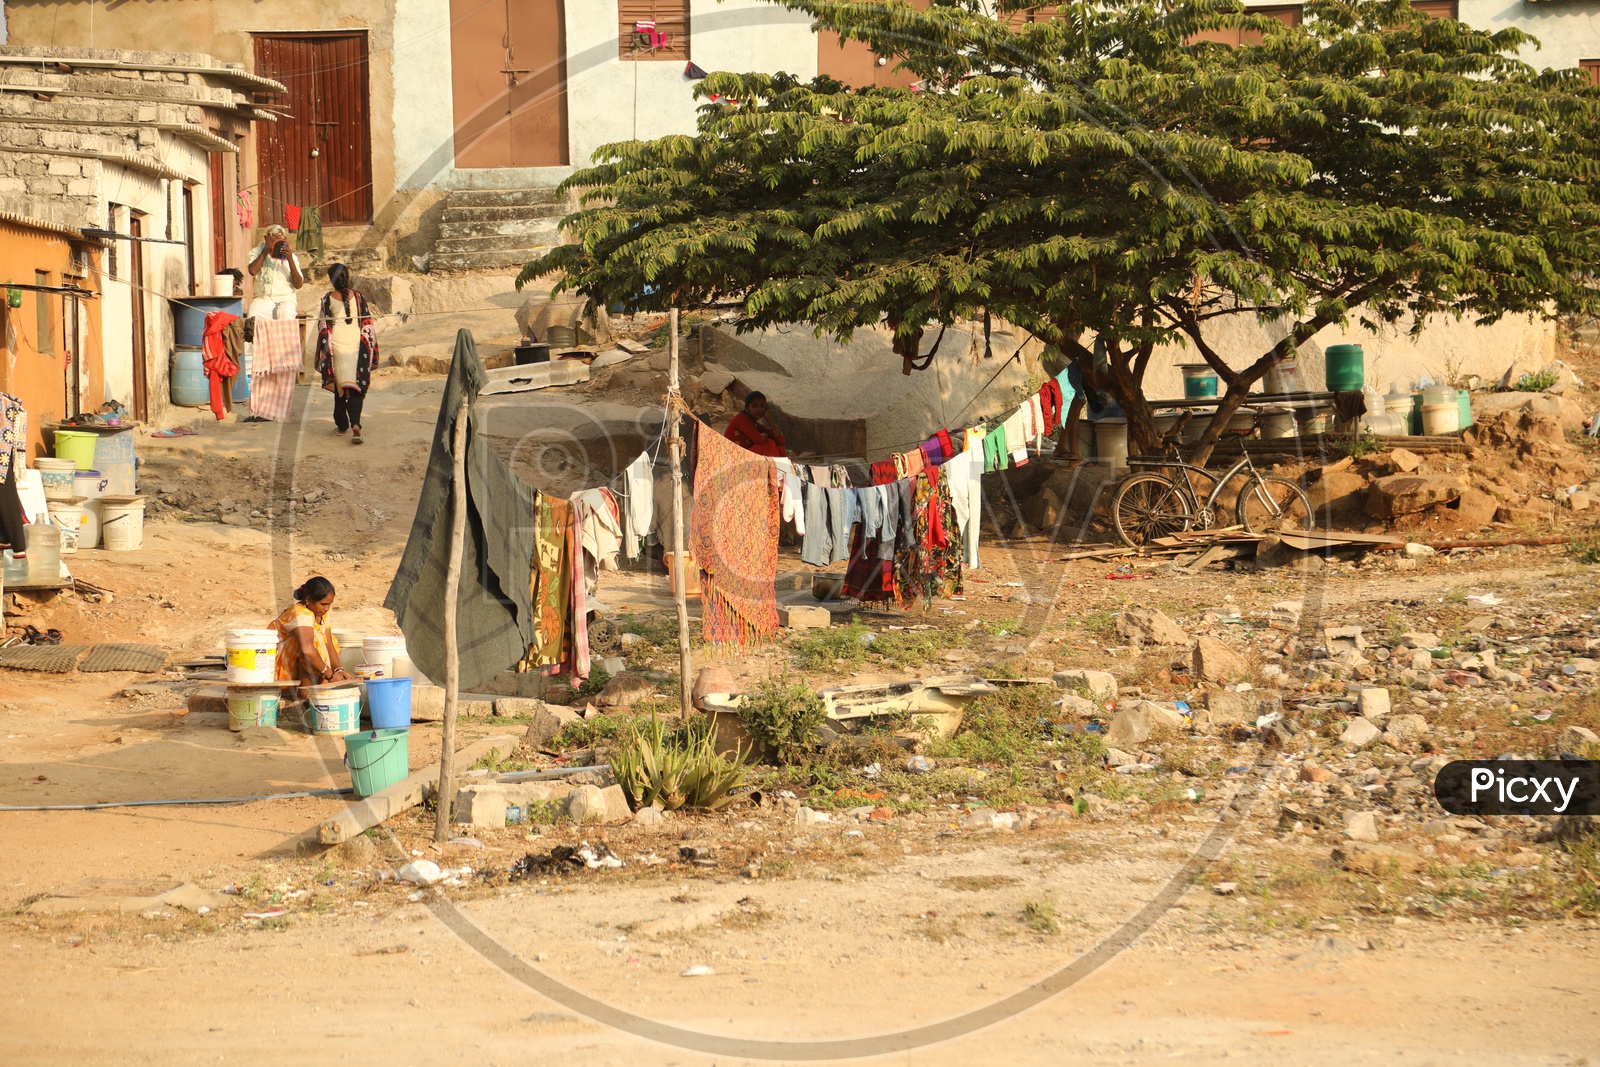 A woman washing clothes in a slum area